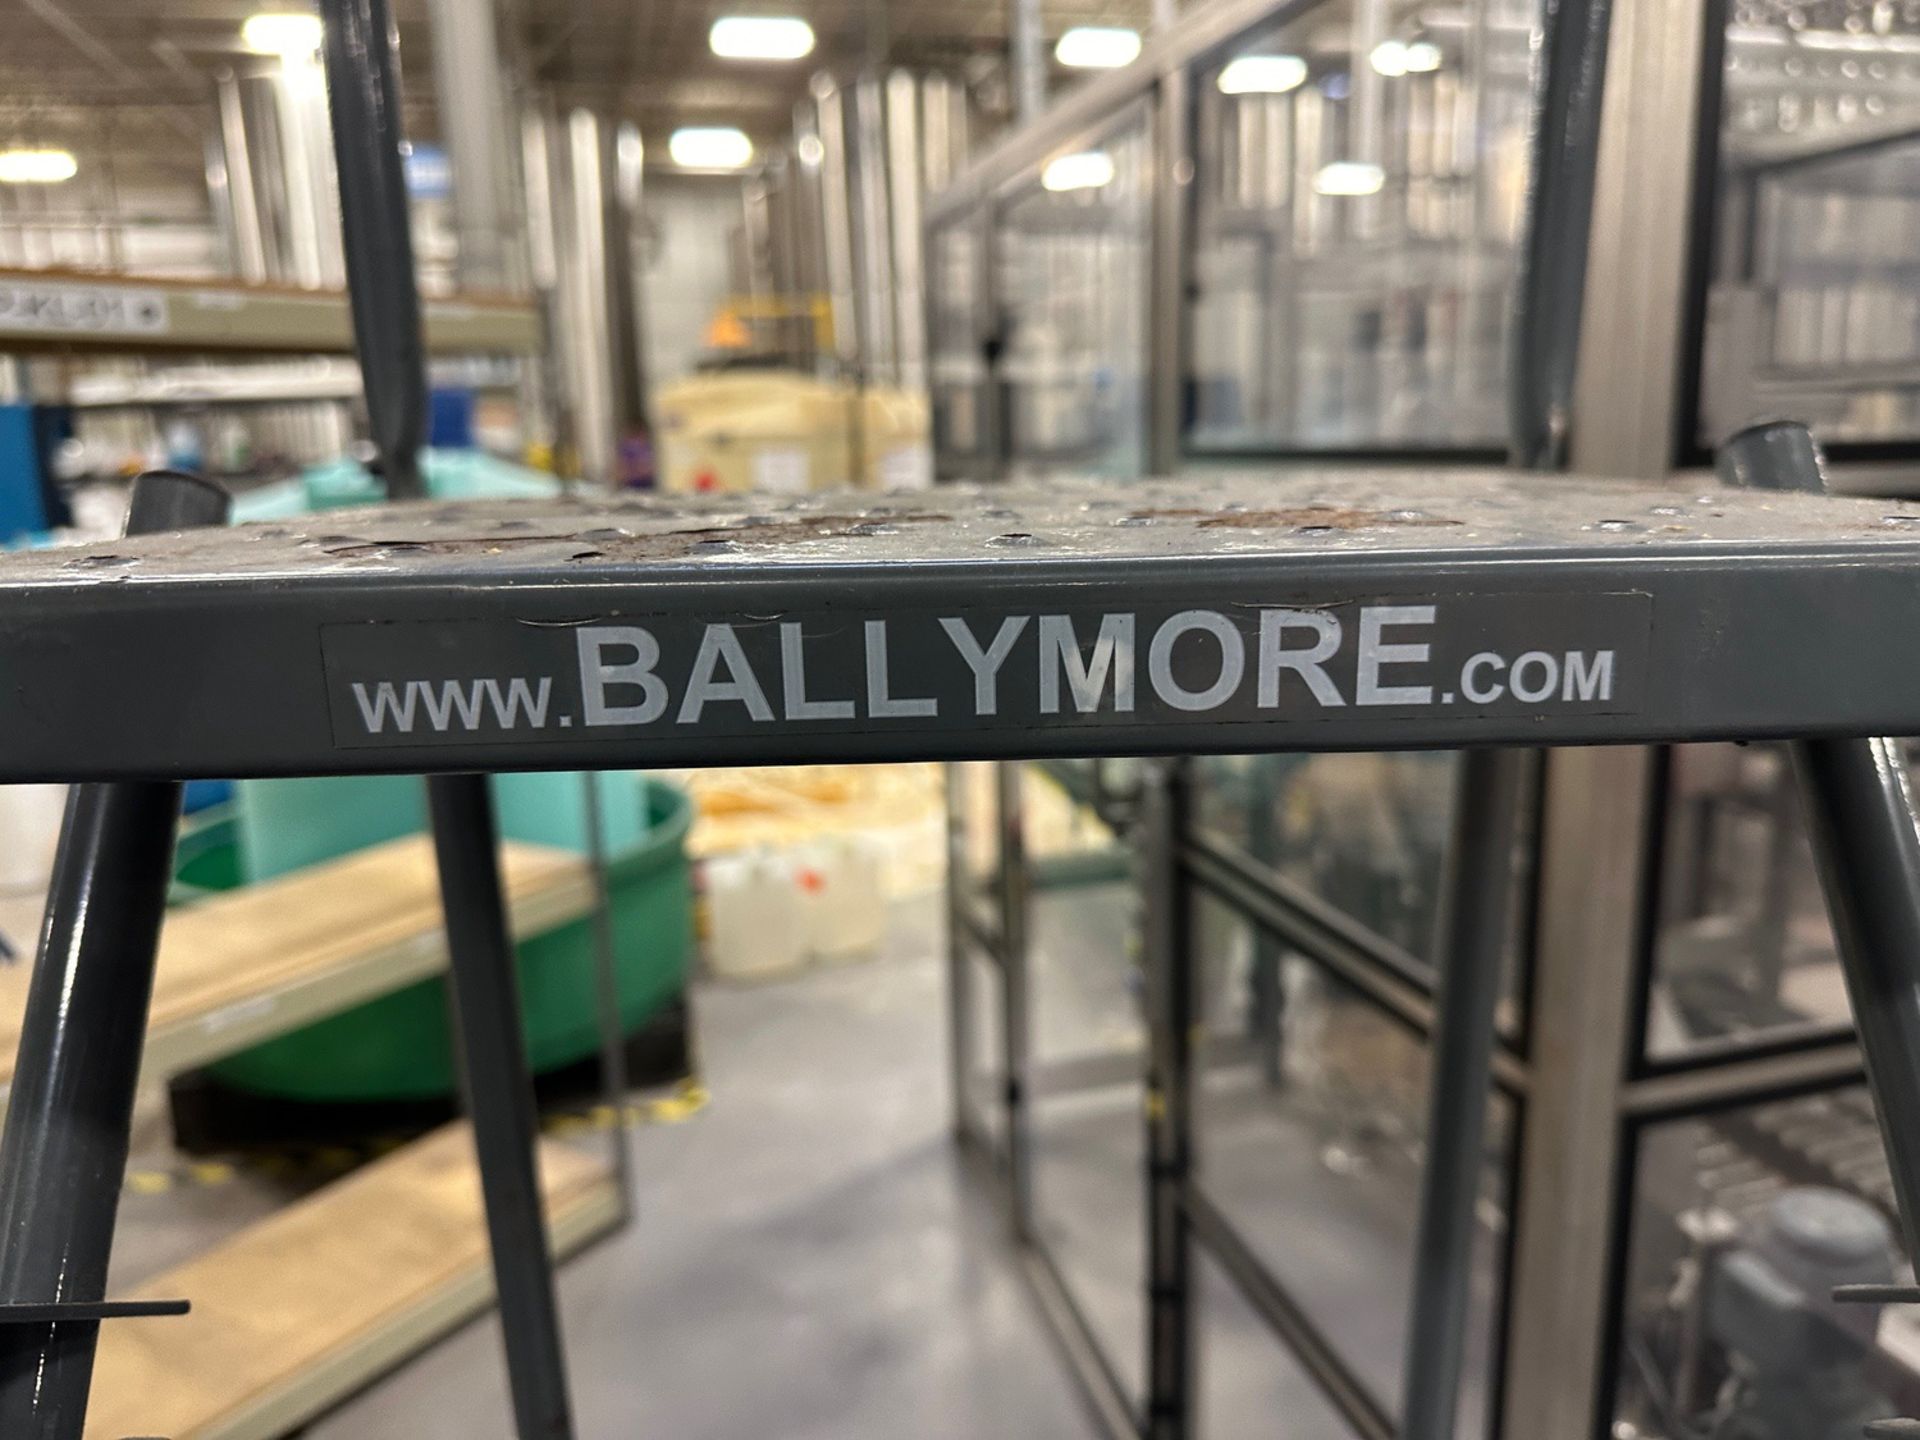 Ballymore Rolling Staircase with 450 LB Capacity (Approx. 5') | Rig Fee $50 - Image 2 of 3